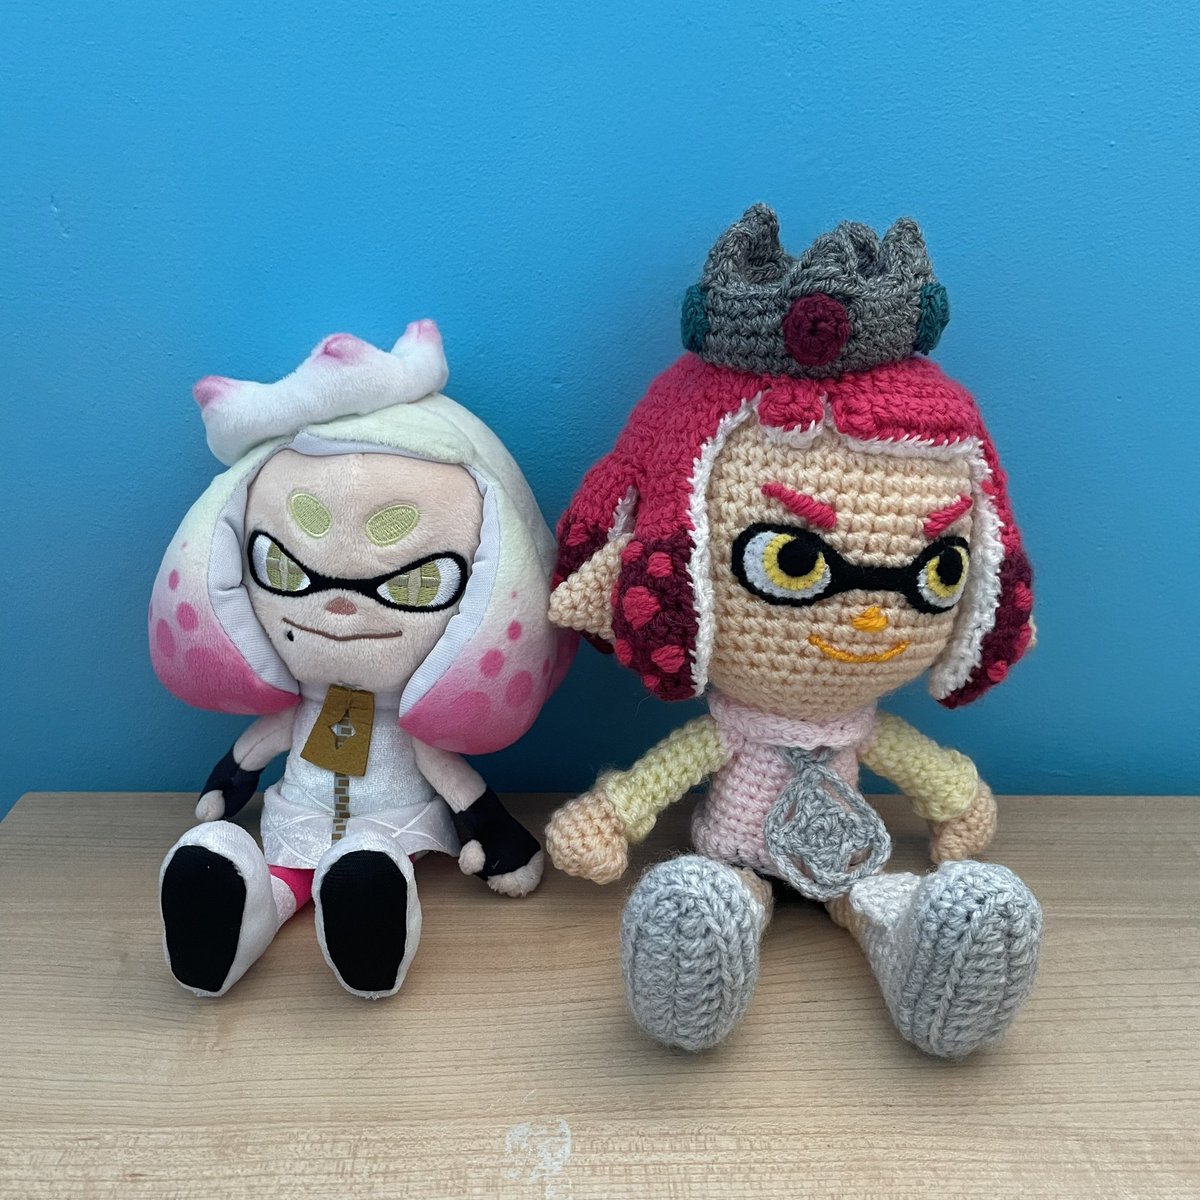 Oh my gosh…that inkling came out so well!! Now I’m really looking forward to making the octoling with the Marina gear.